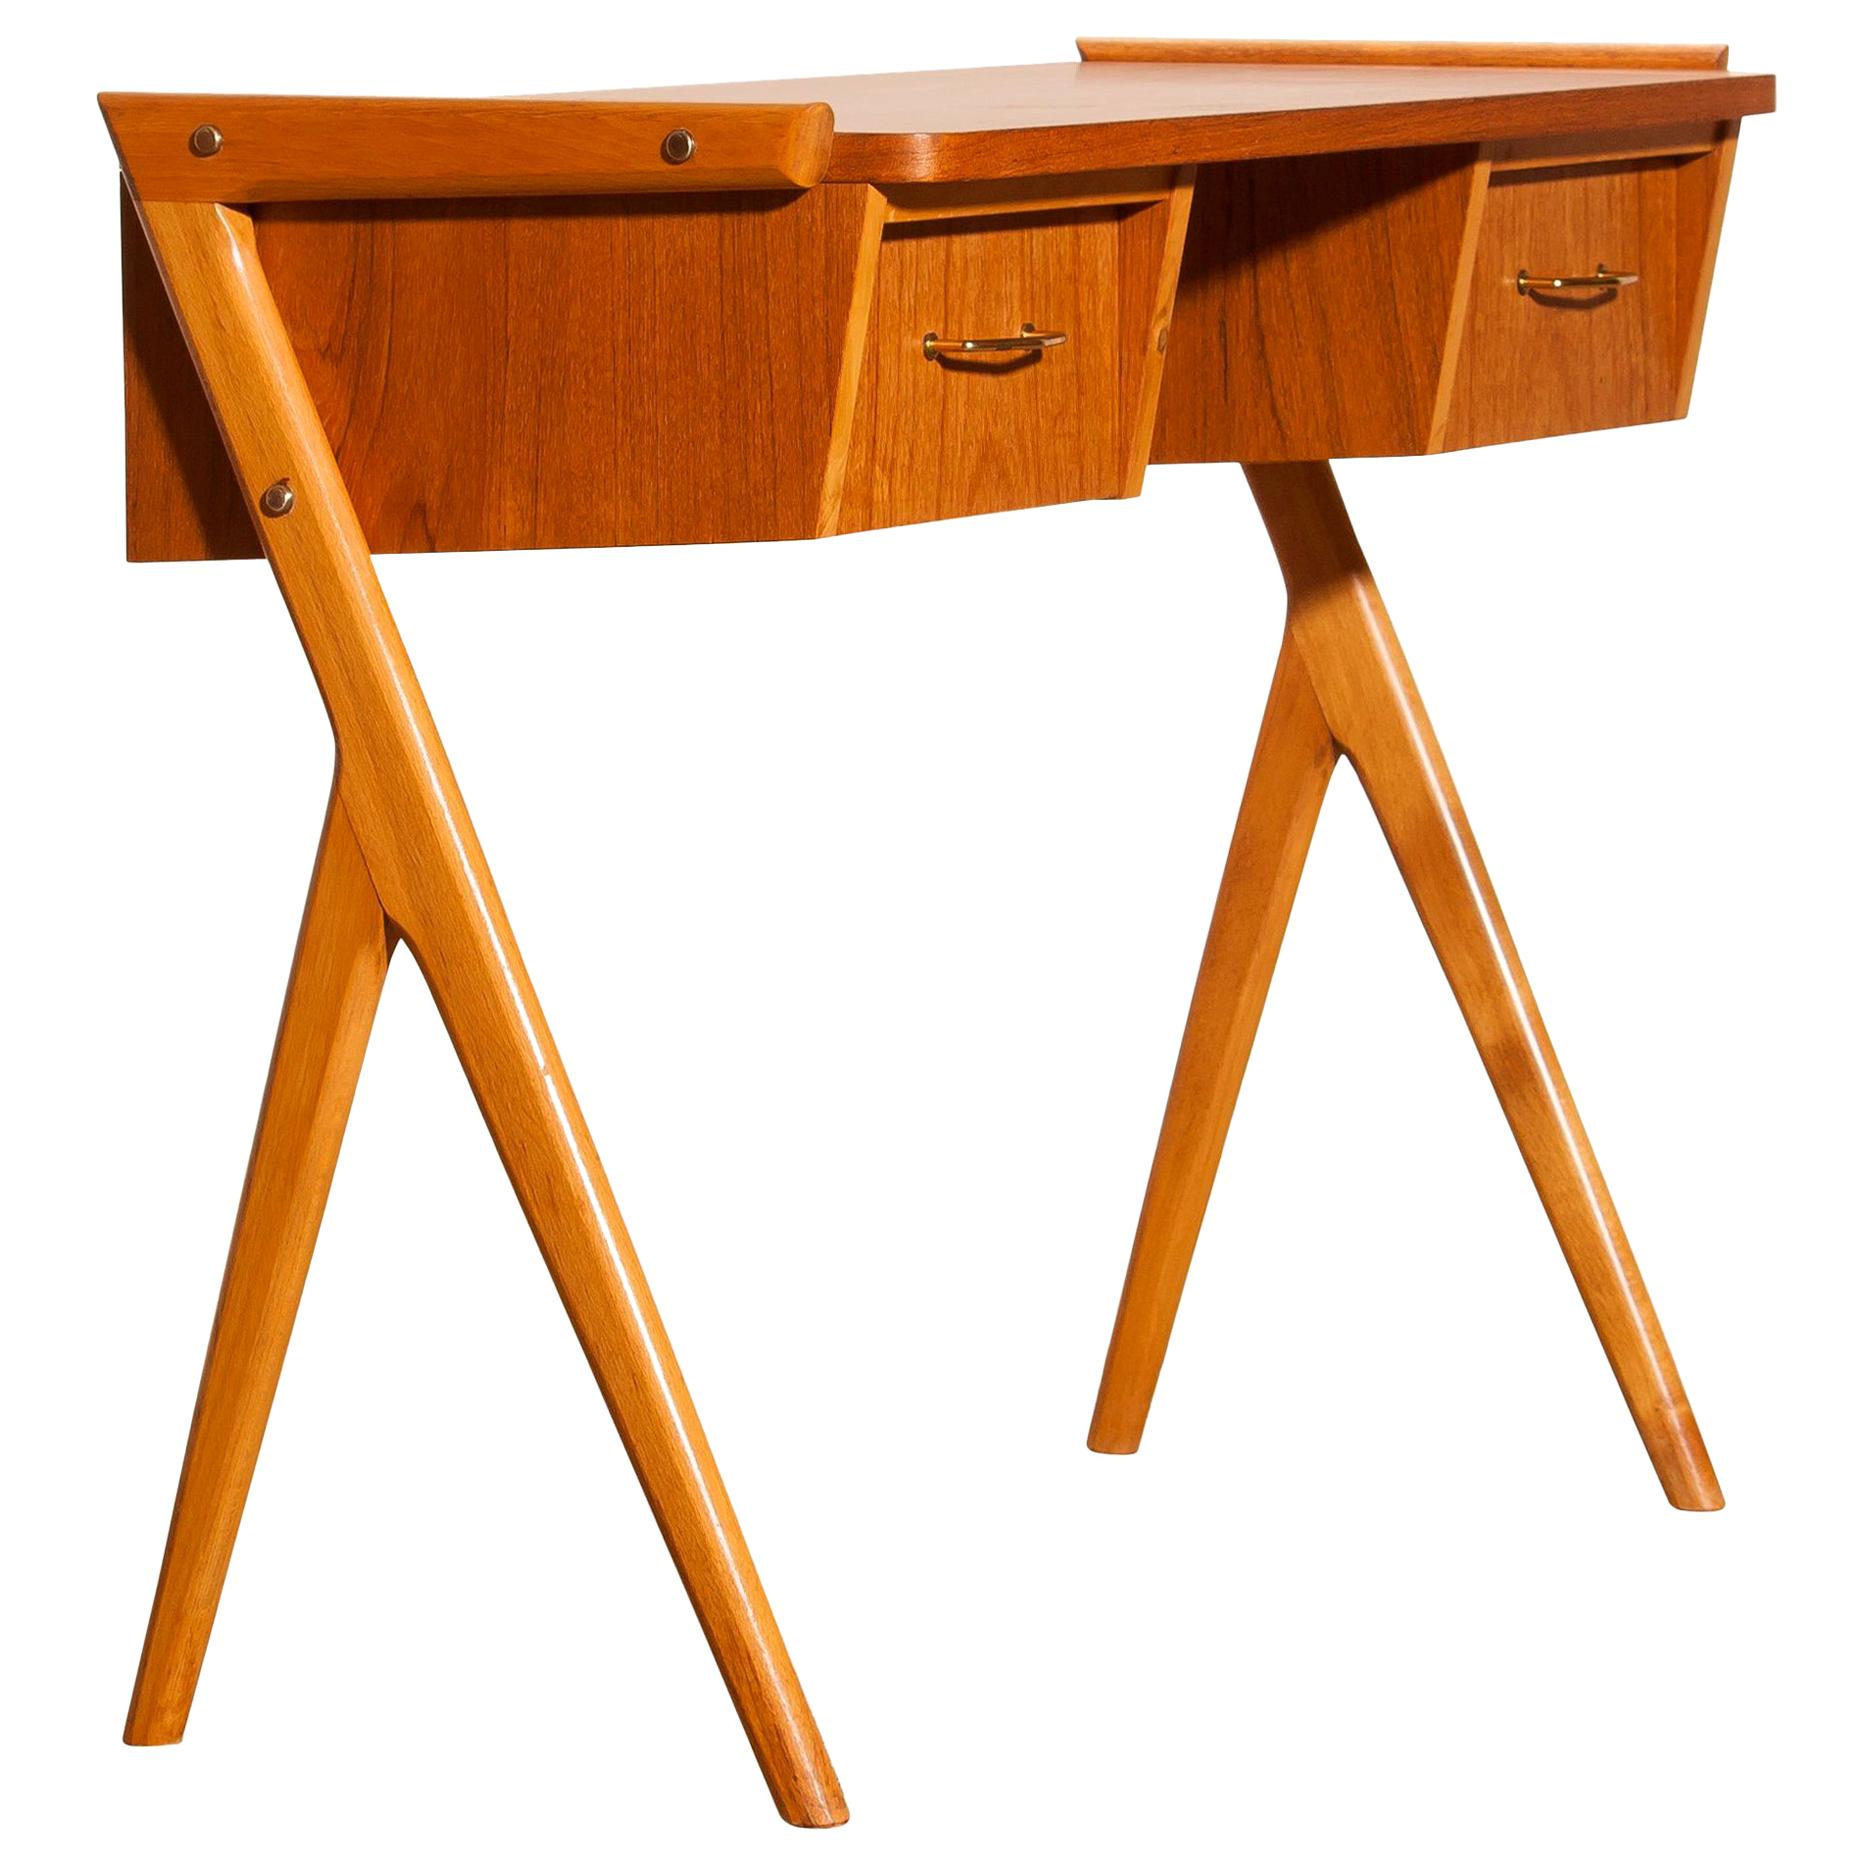 Very beautiful vanity or ladies desk from Sweden
The table is made of teak and has two drawers with brass details.
It is in a very nice condition.
Period, 1950s.
Dimensions: H 70 cm, W 84 cm, D 40 cm.